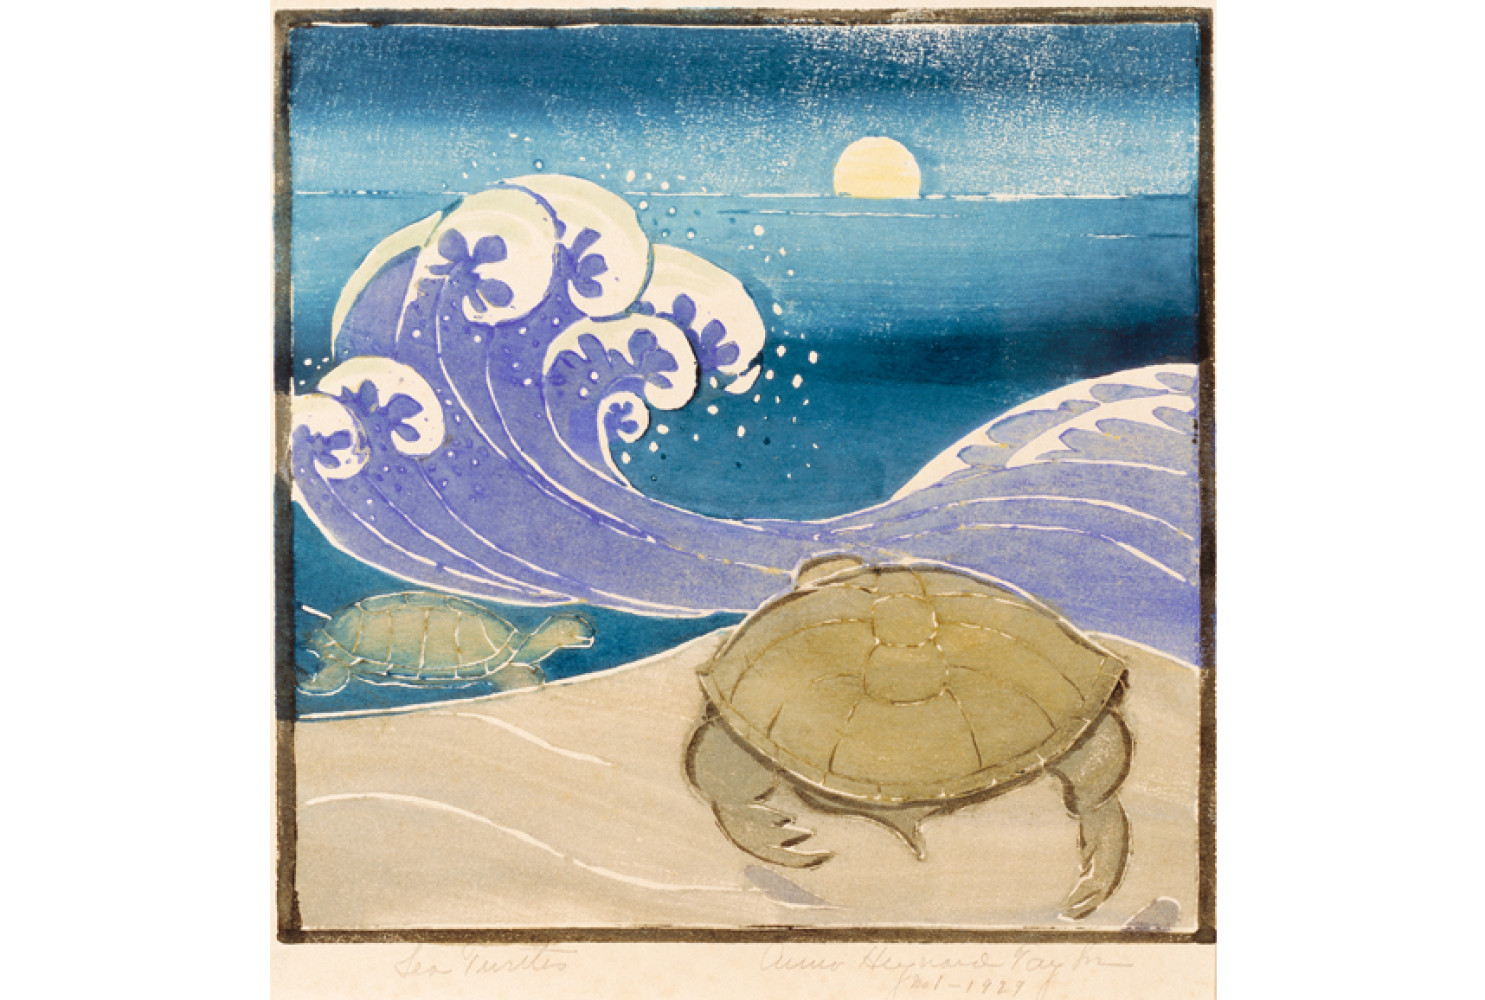 Sea Turtle, 1929, by Anna Heyward Taylor (American, 1879-1956); woodblock print on paper; 10 x 11 inches; Gift of Mrs. George Hewitt Myers; 1958.004.0002
